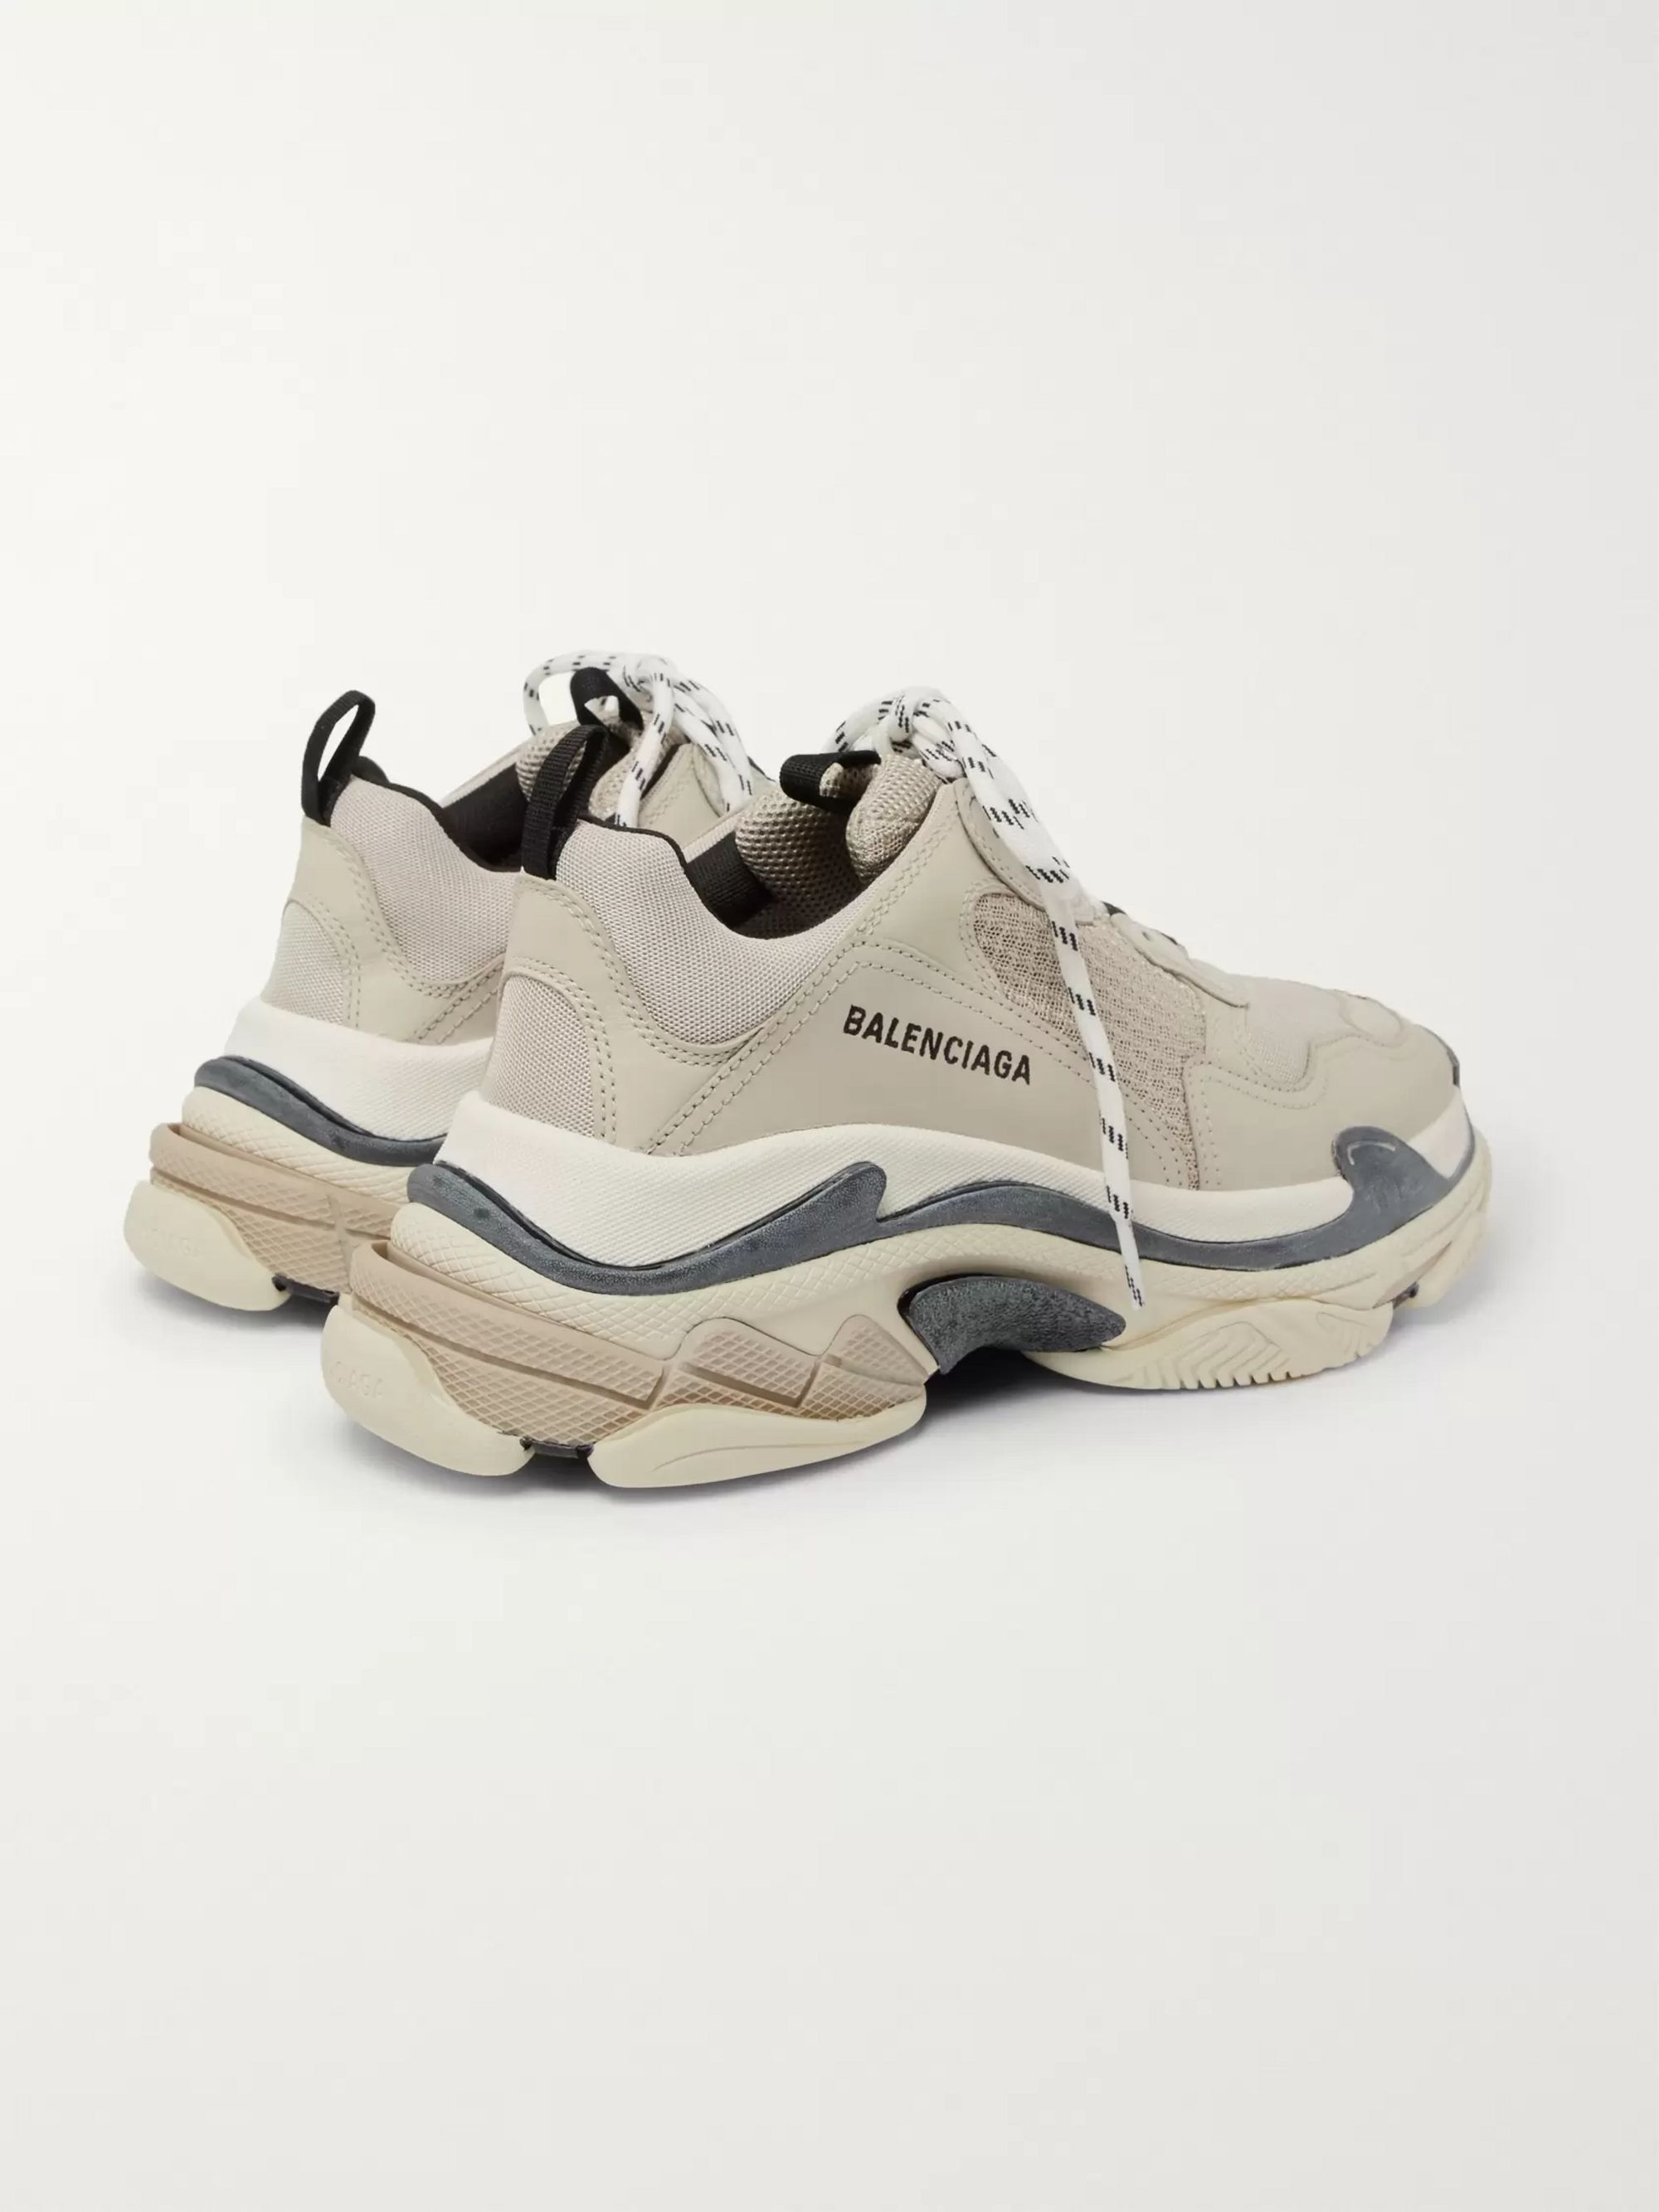 Looking for some help with some Balenciaga Triple S FashionReps